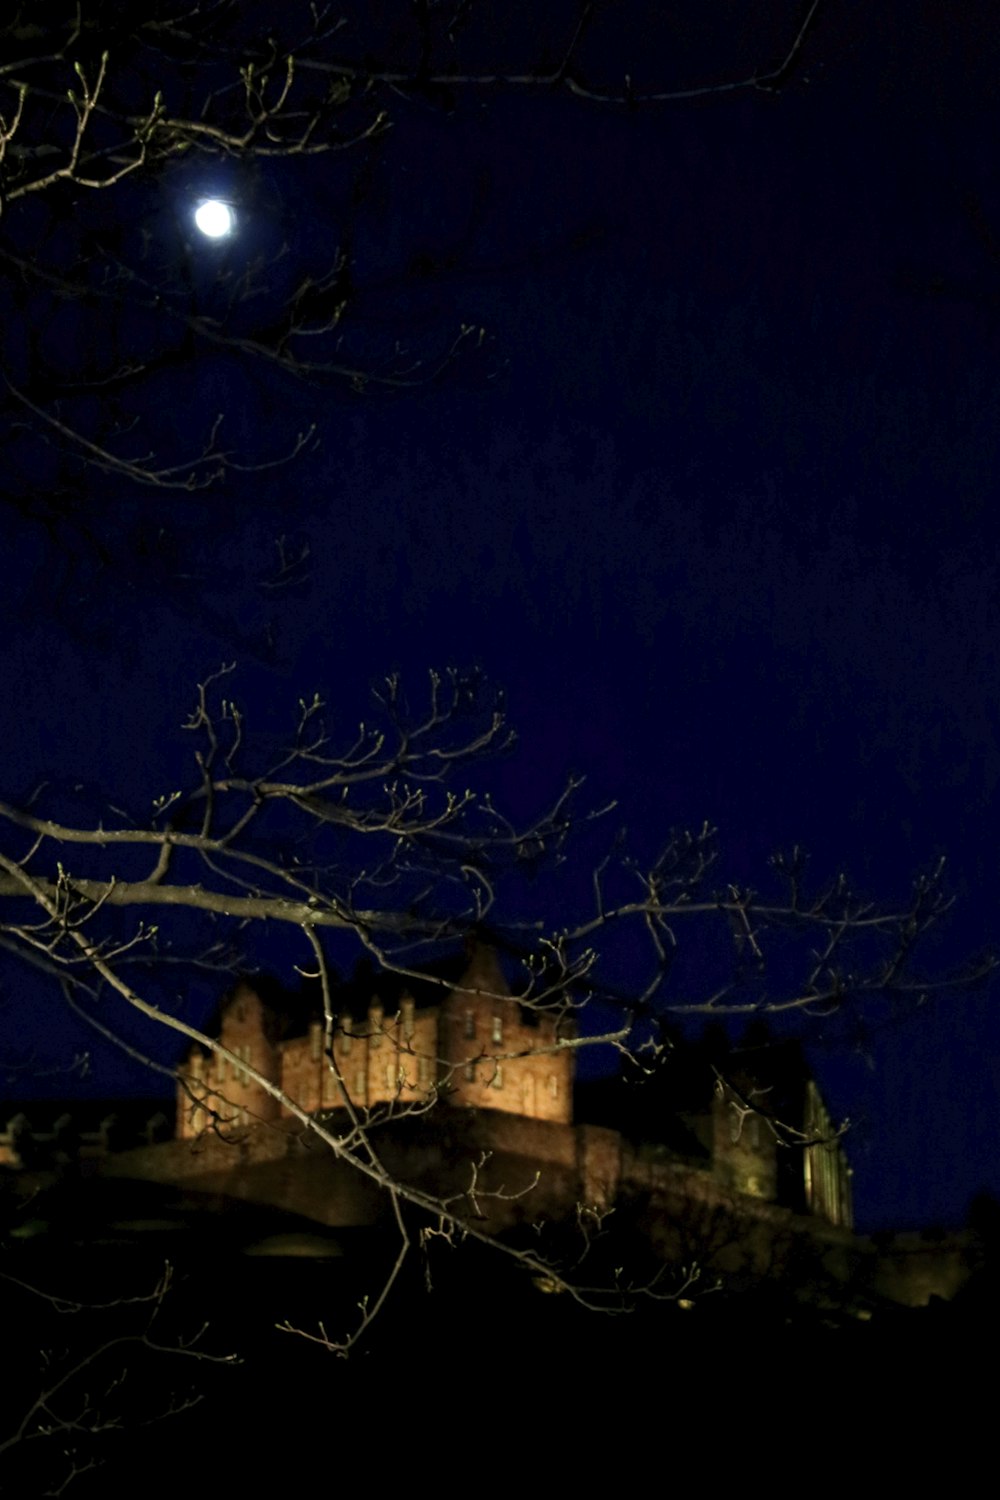 a full moon shines above a castle at night